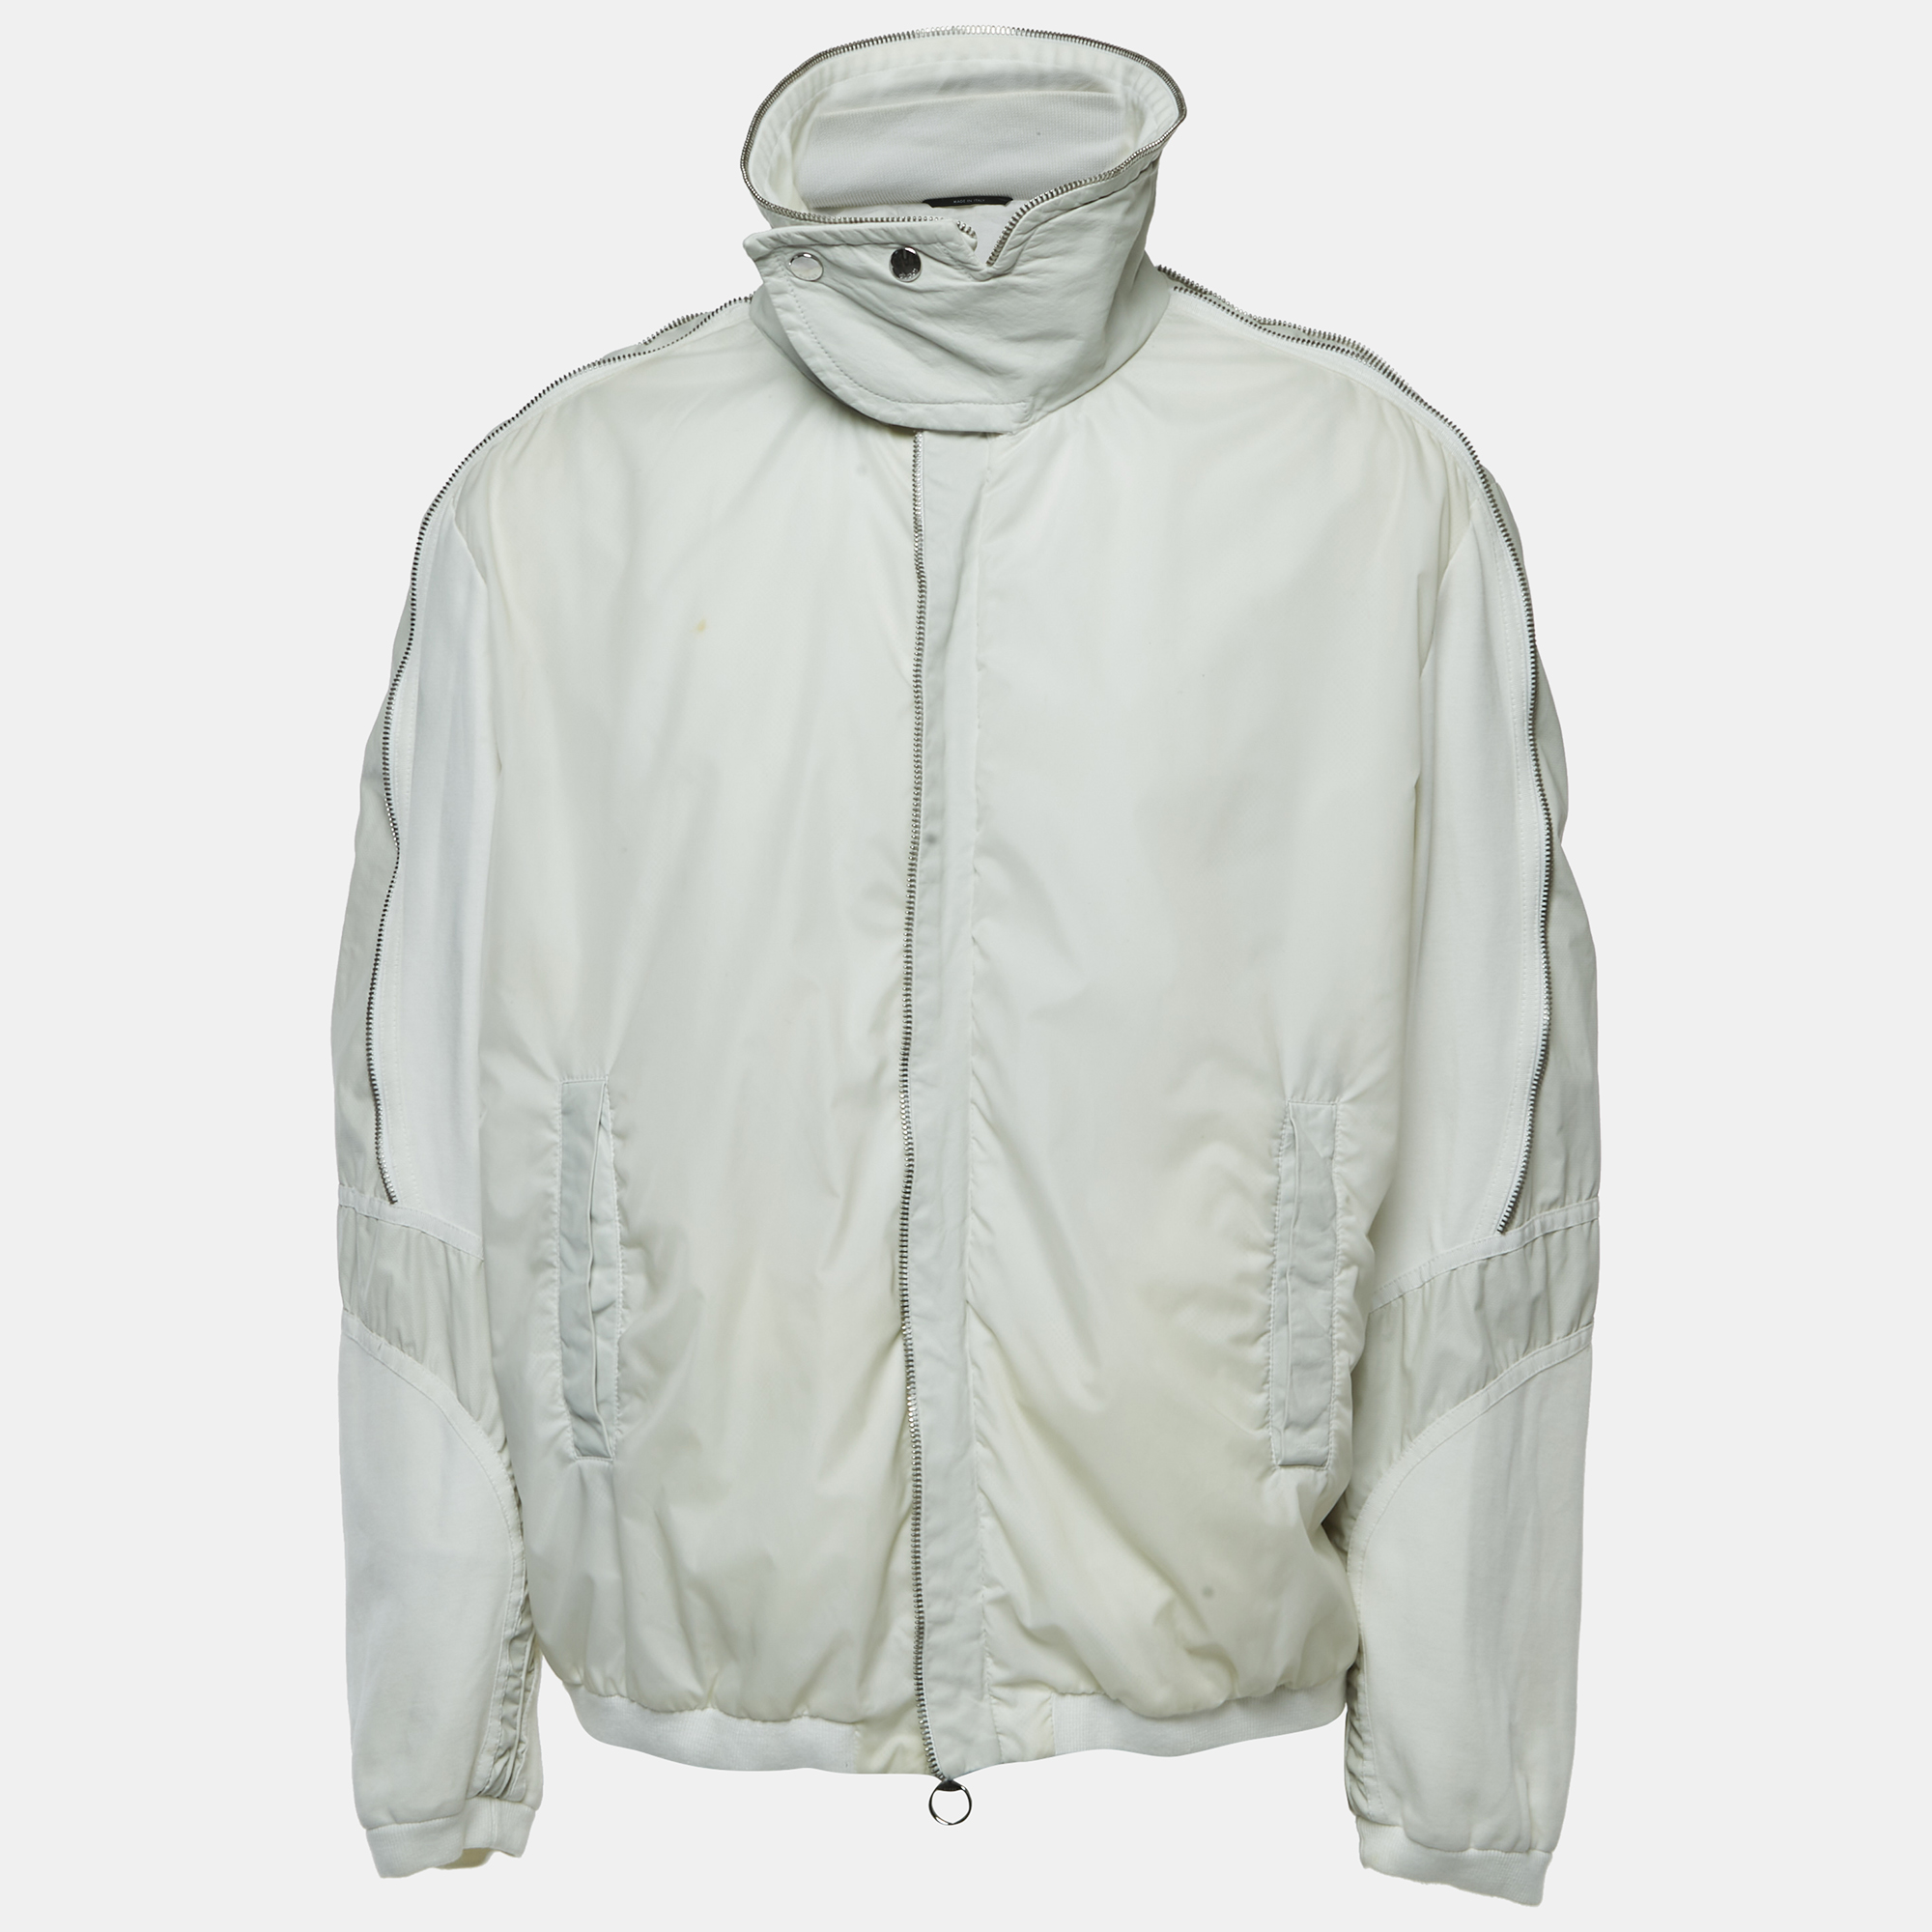 Gucci White Nylon Leather Trimmed Zip Front Jacket 4XL